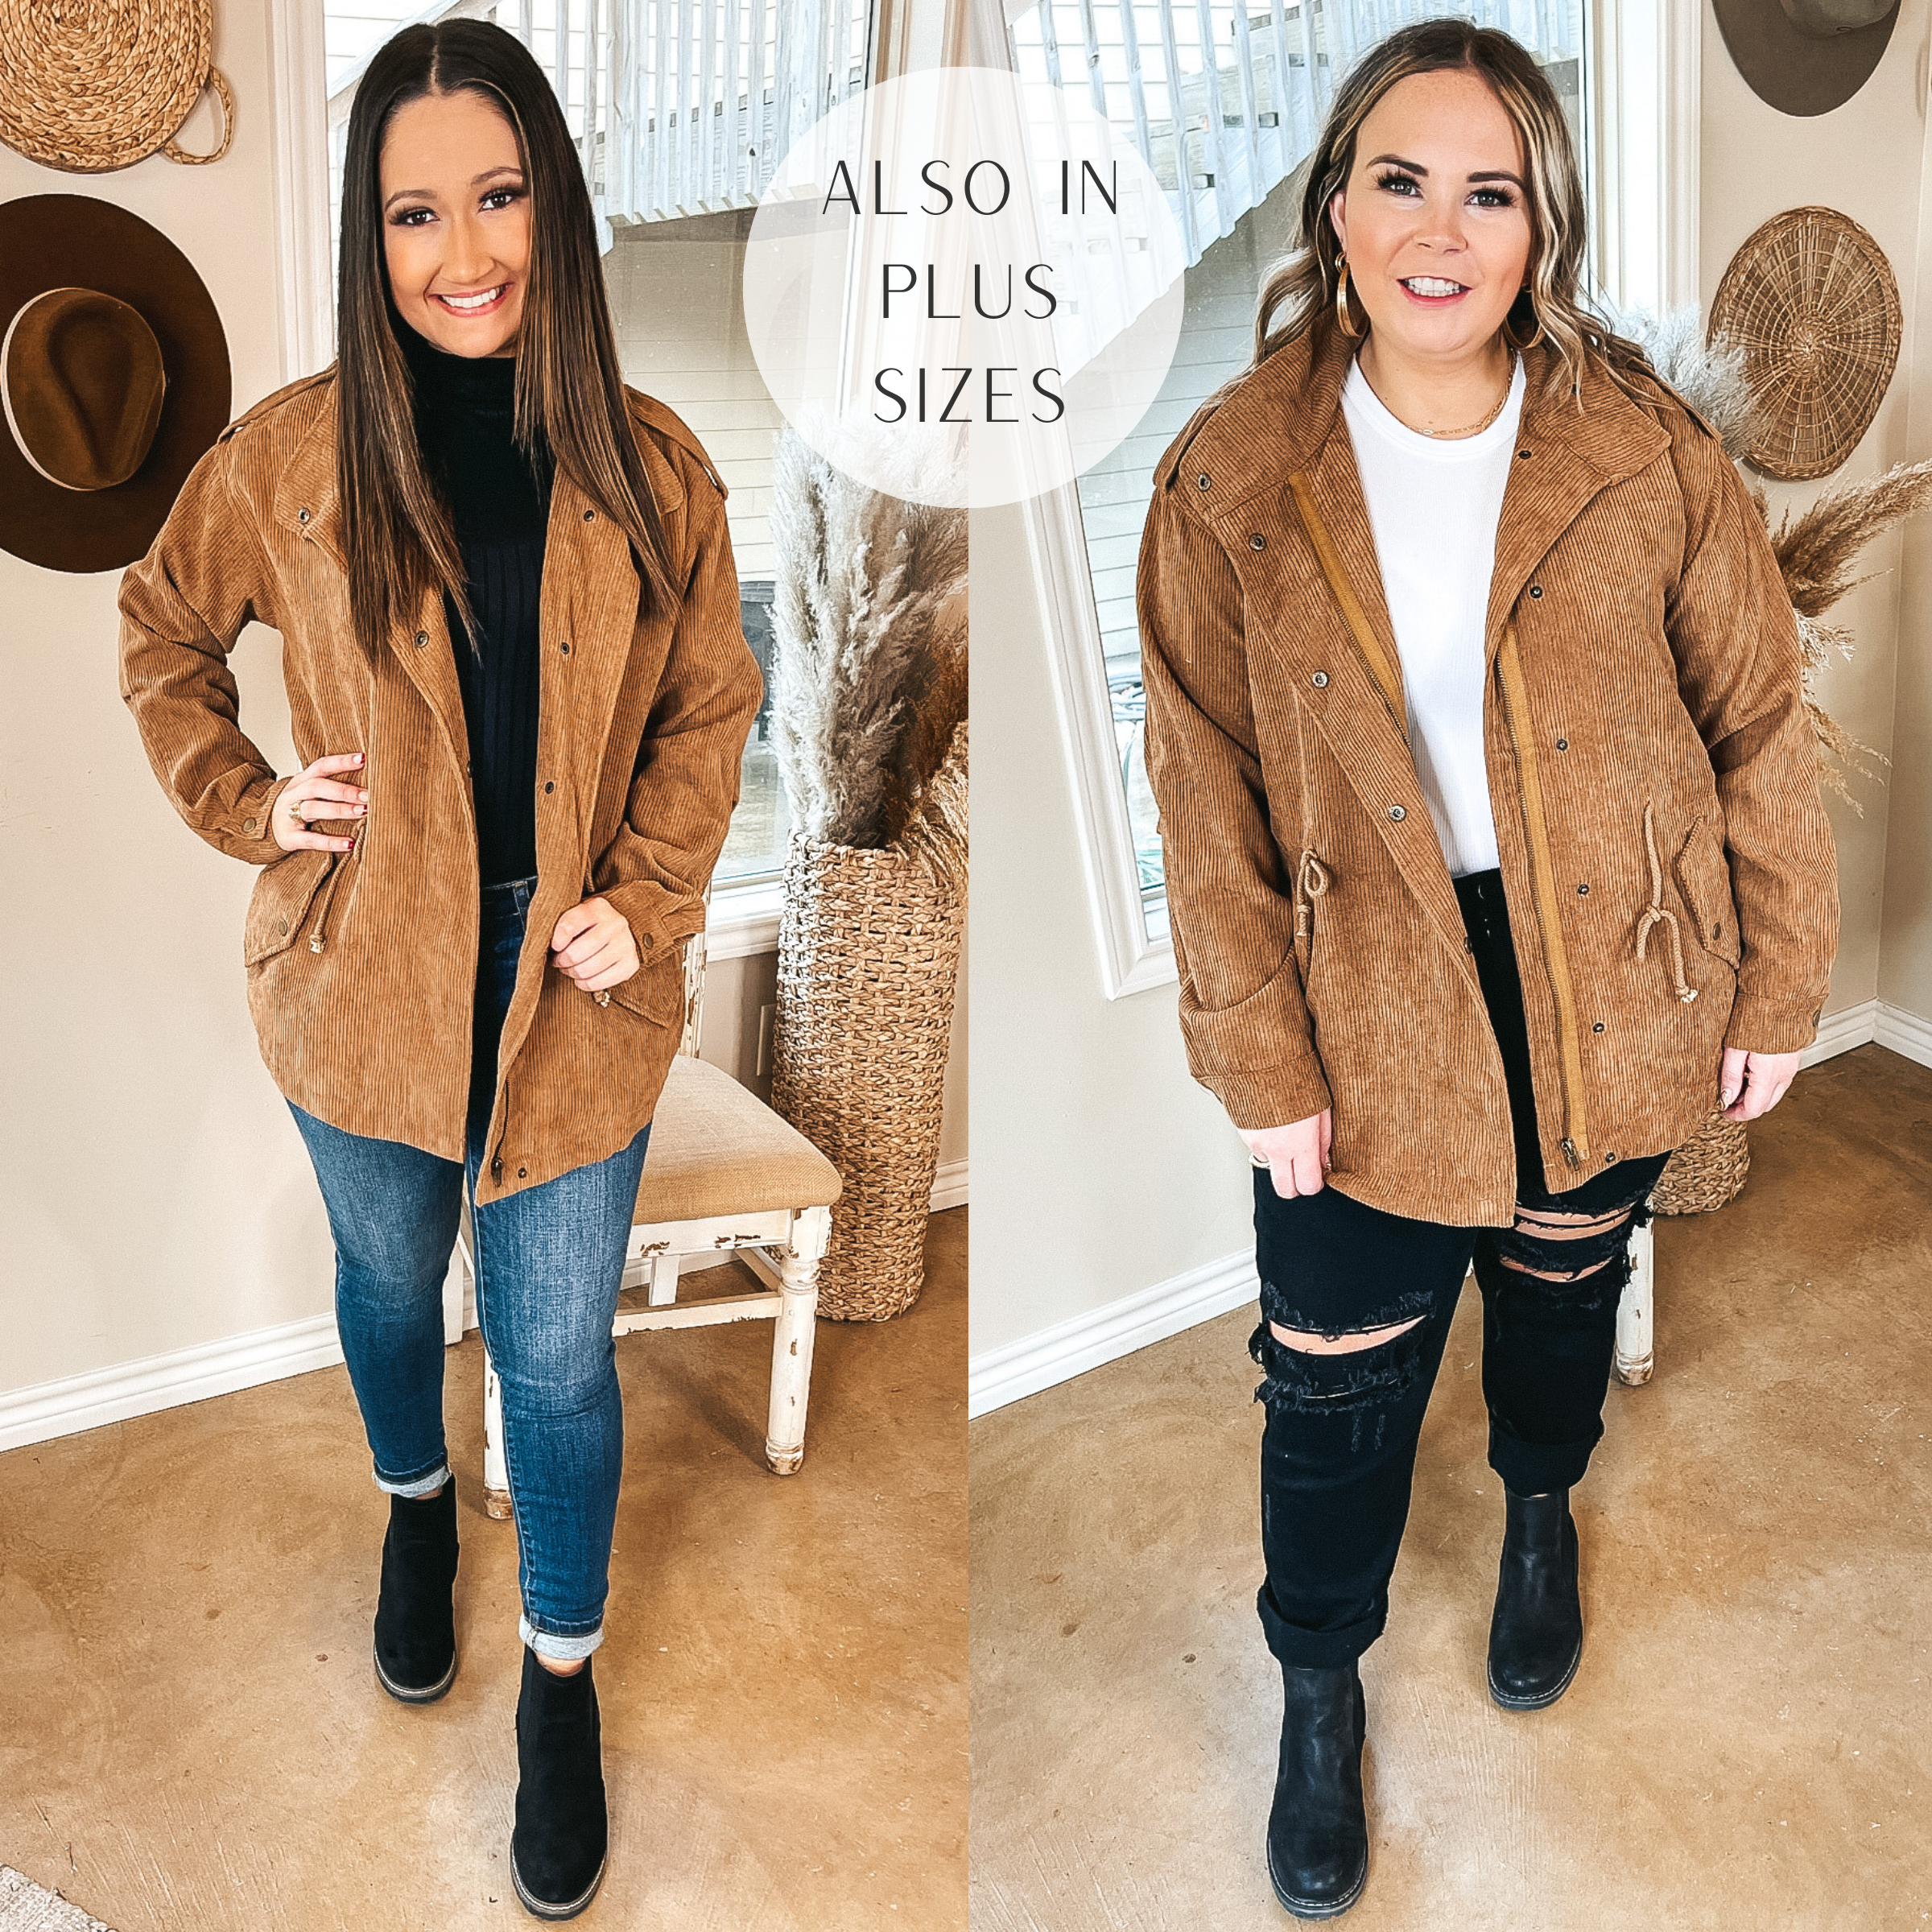 Models are wearing a camel brown corduroy utility jacket. Size small model has it paired with a black tank top, skinny jeans, and black booties. Size large model has it paired with a white bodysuit, black distressed jeans, black booties, and gold jewelry.